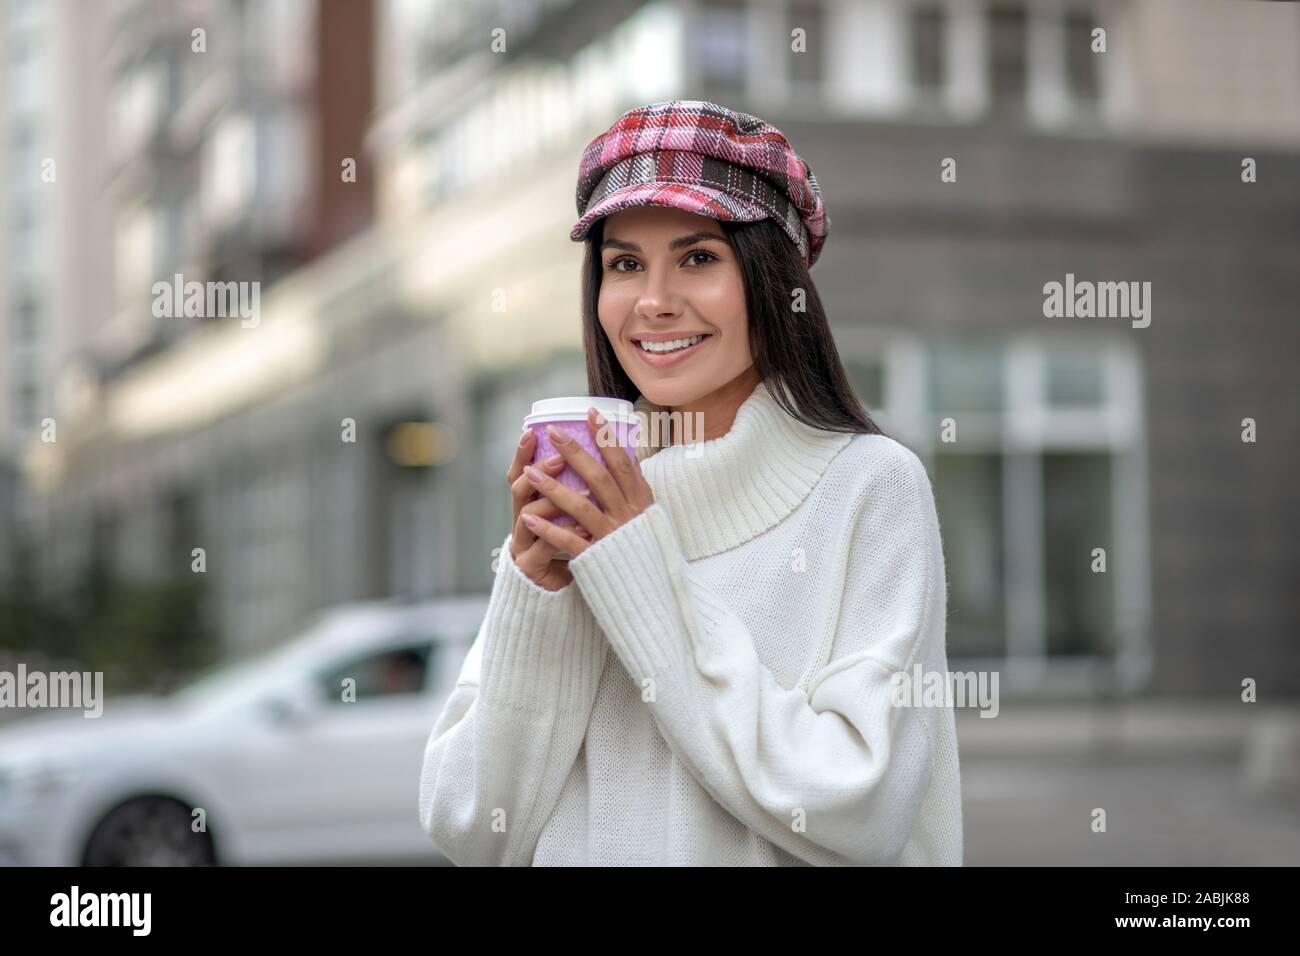 Positive joyful woman holding a cup with coffee Stock Photo